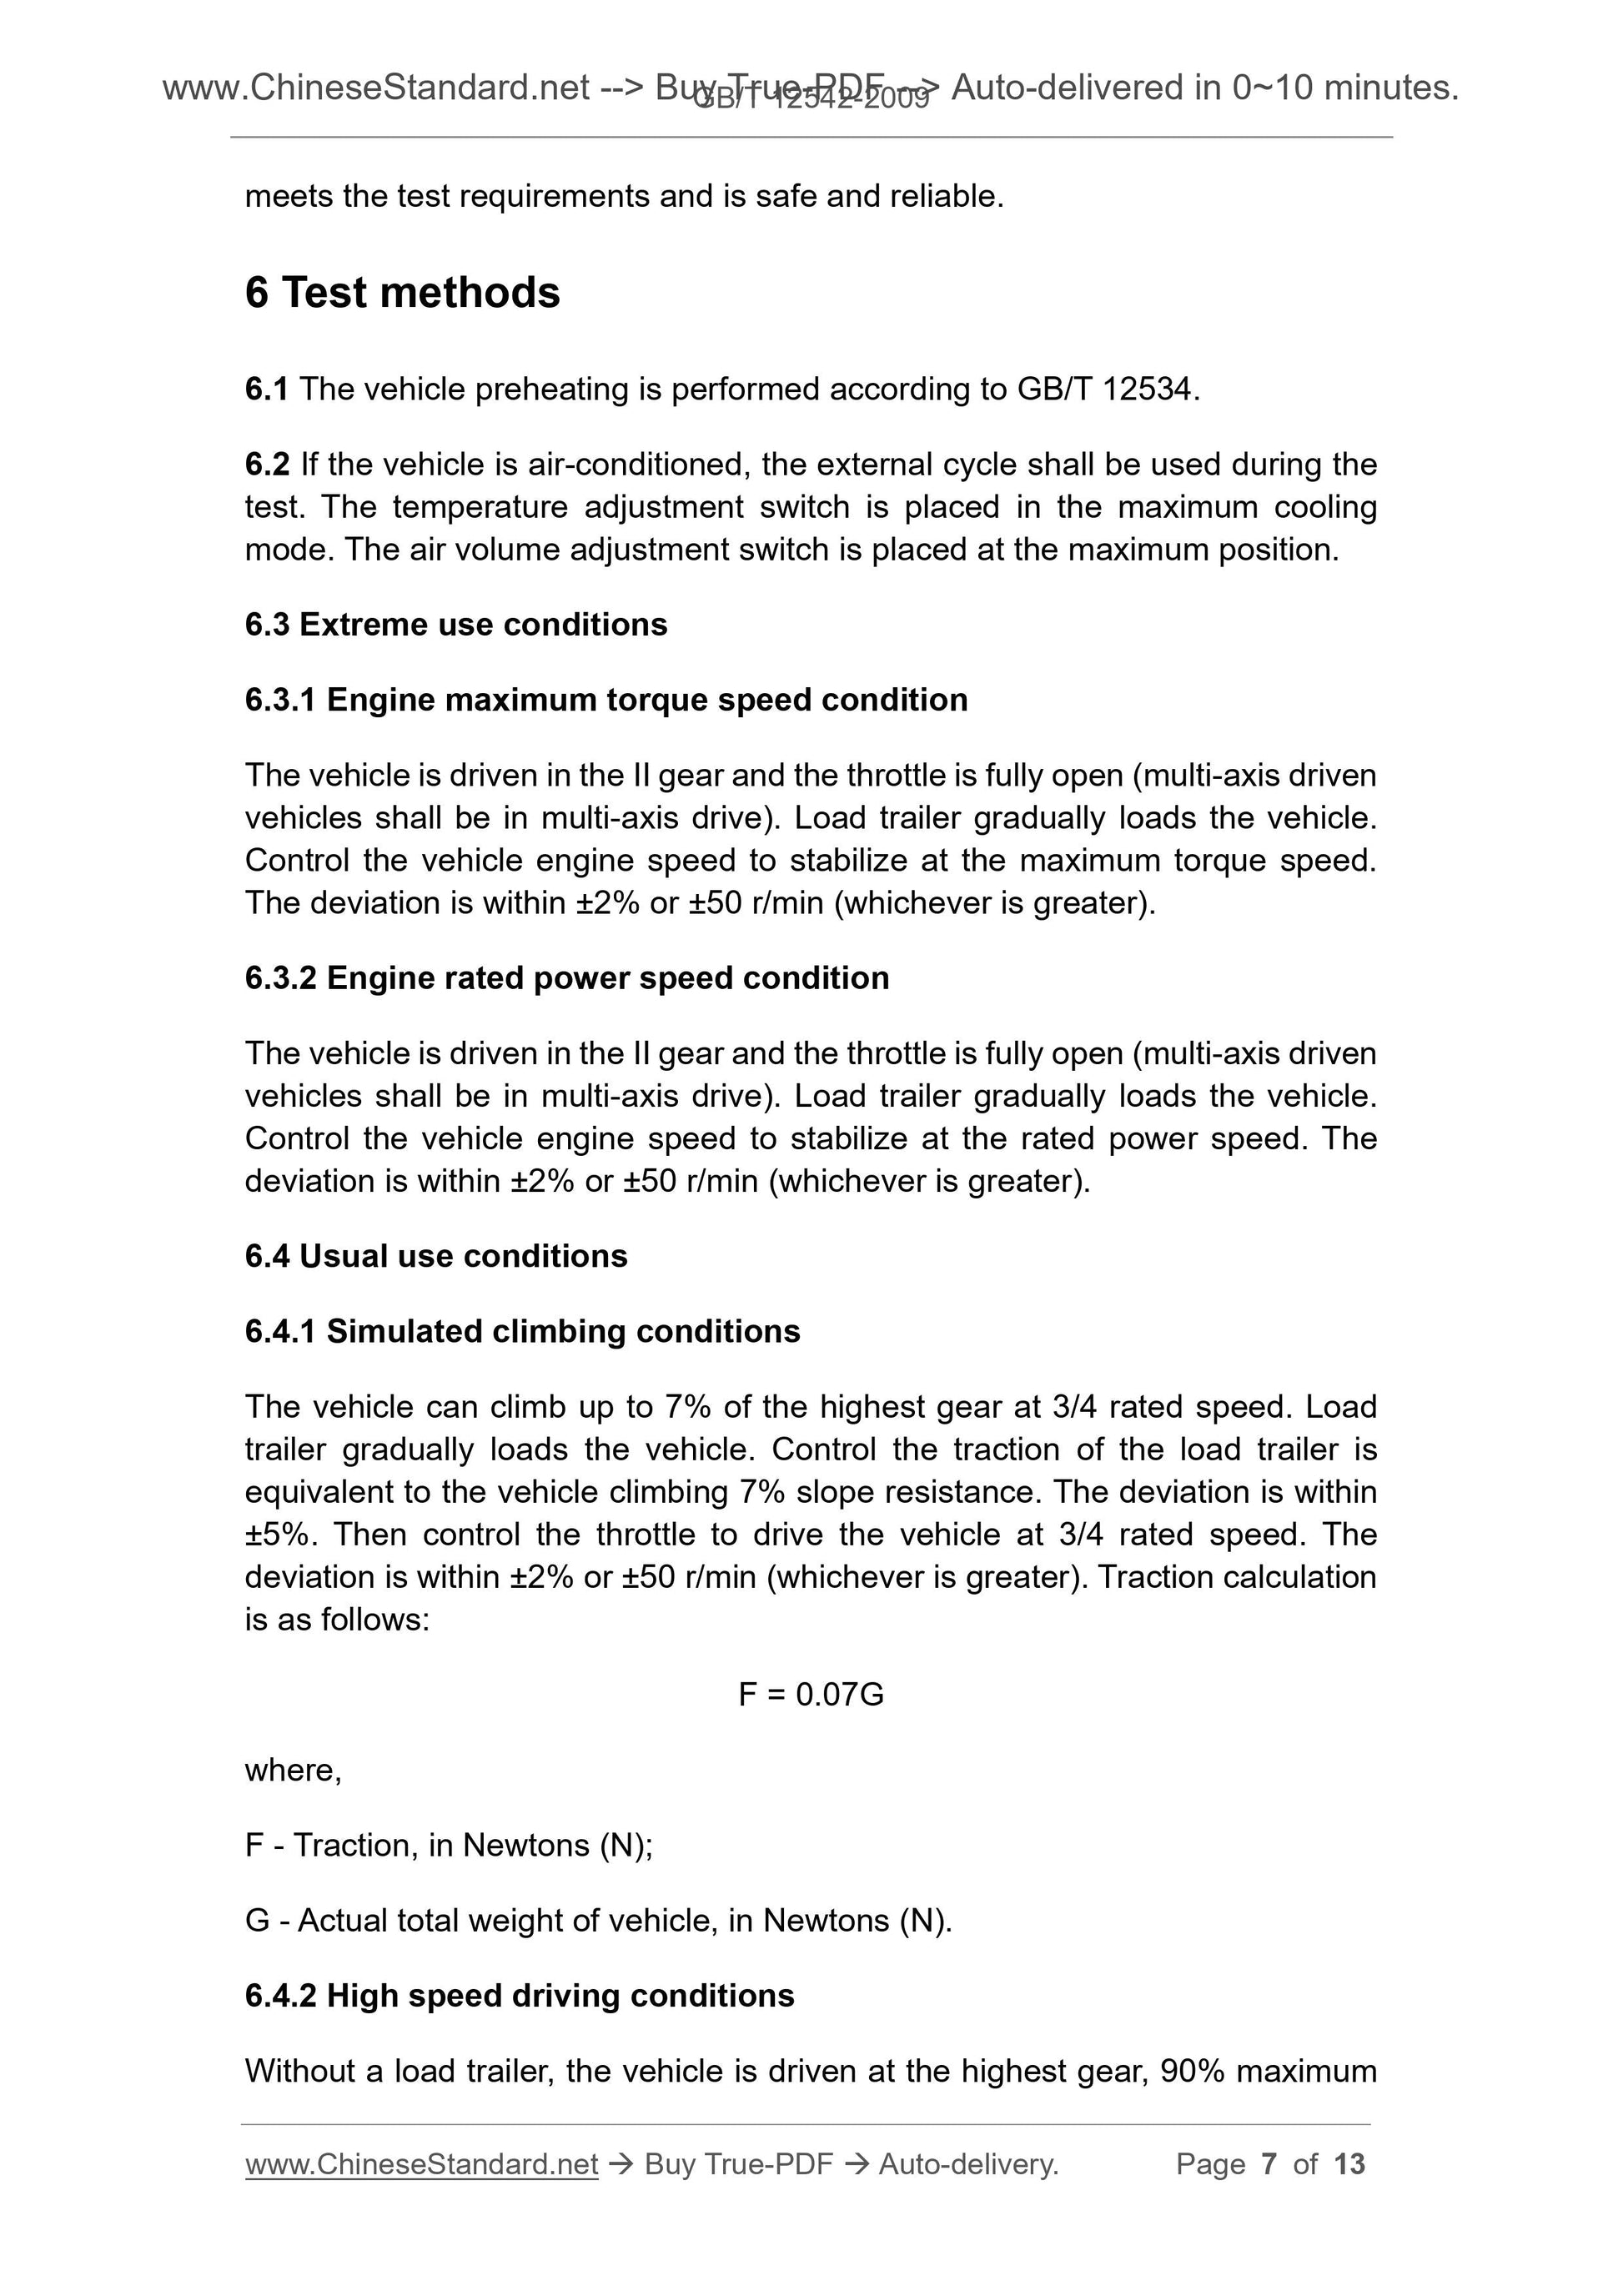 GB/T 12542-2009 Page 5